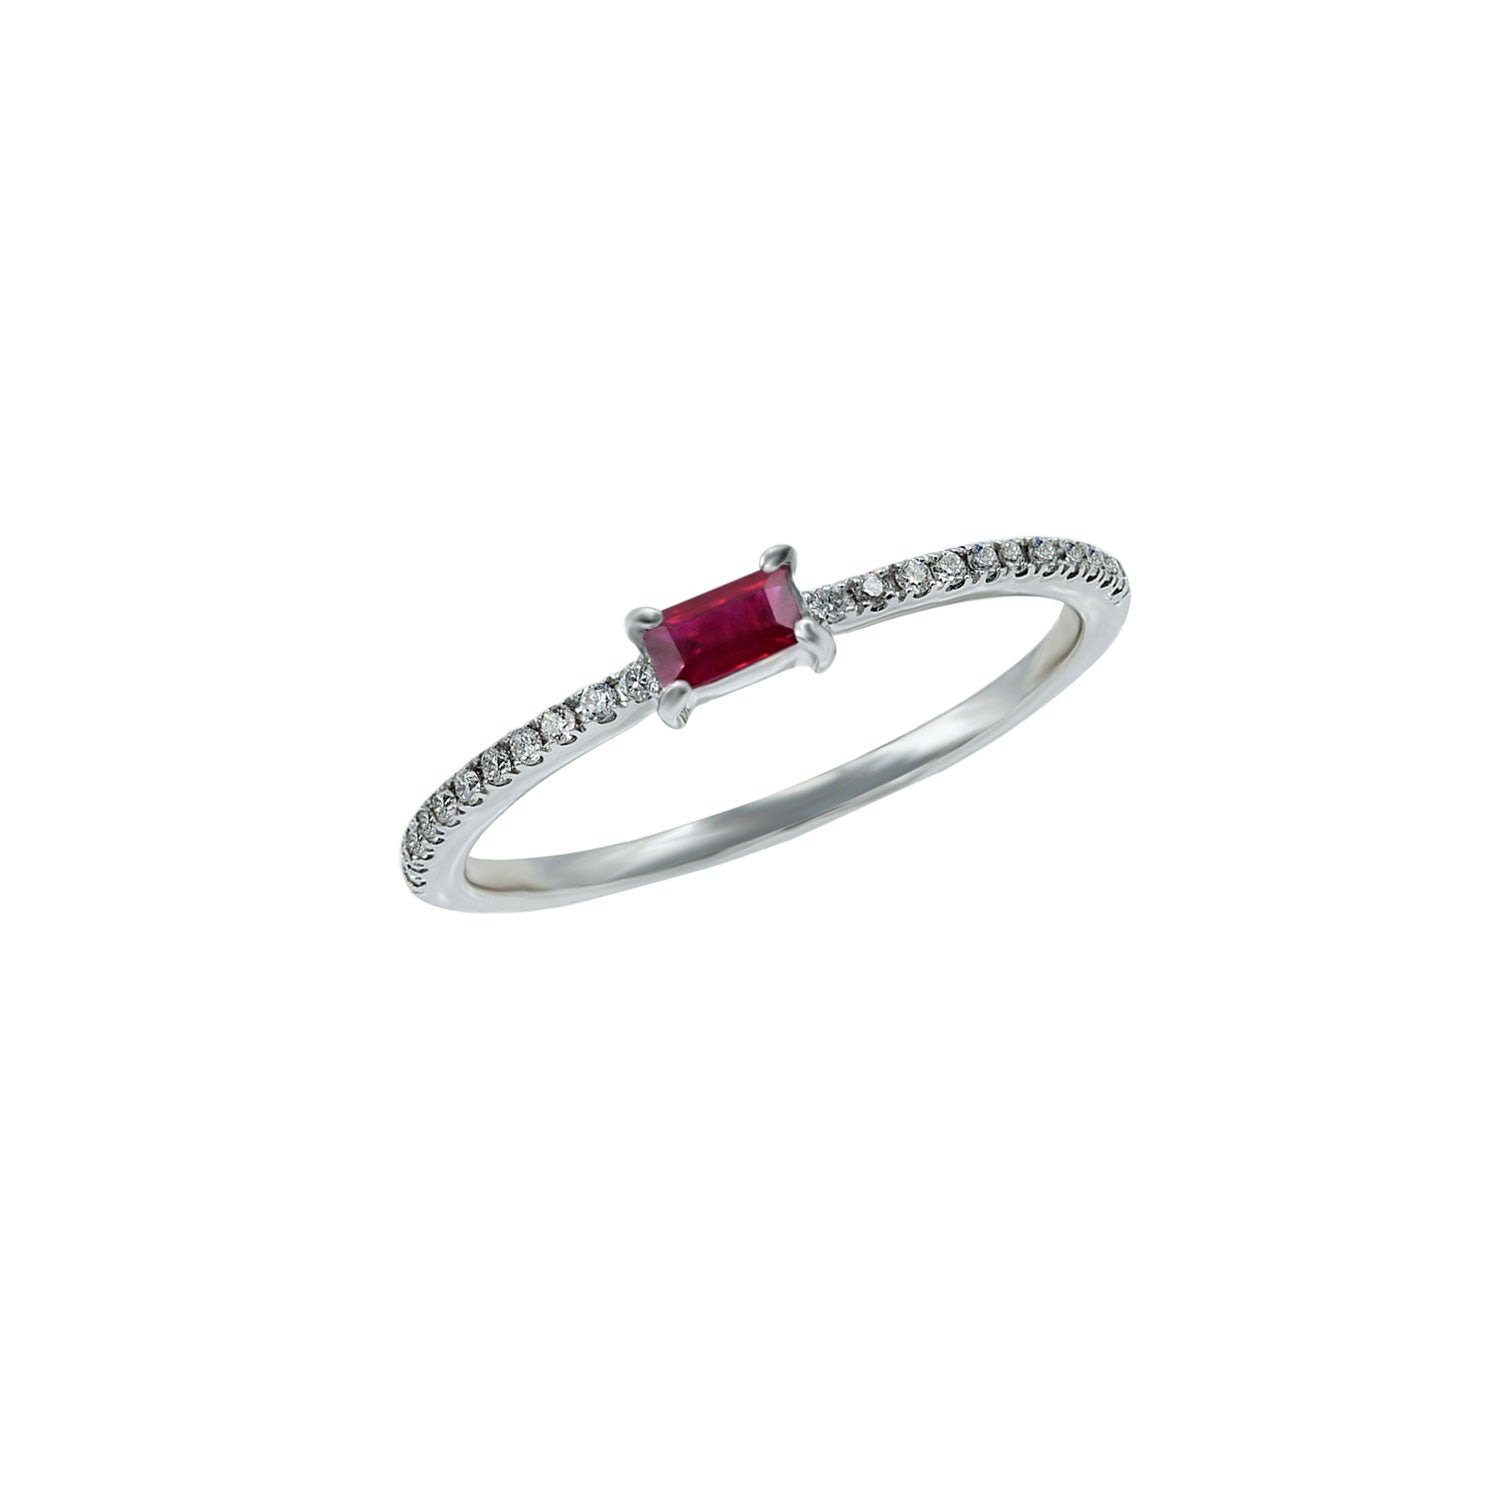 Ruby ring. Ruby and diamond ring.